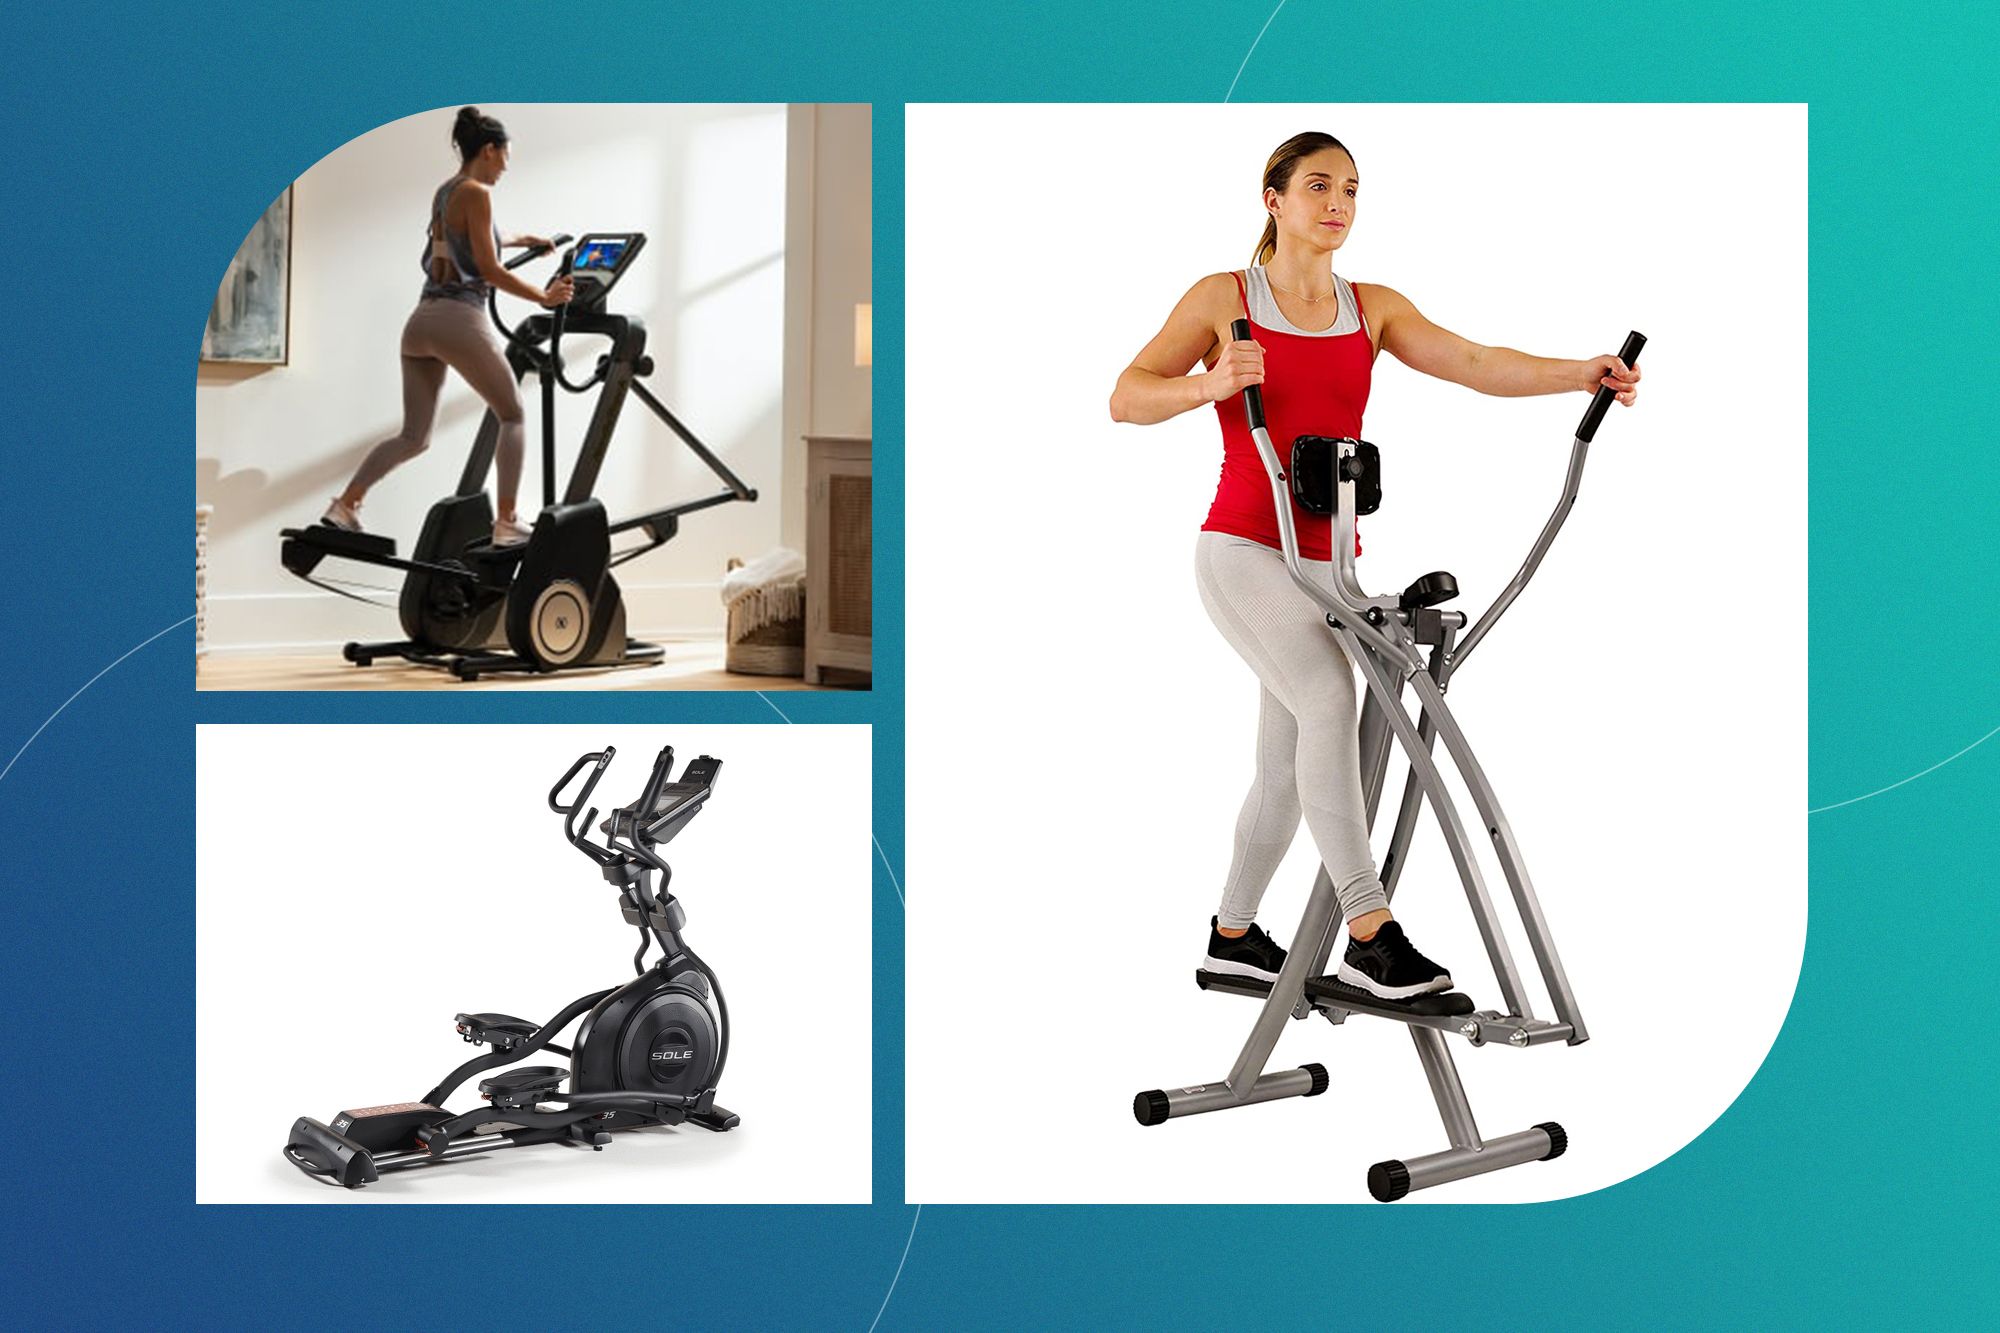 Which Are the 15 Best Gym Equipment & Machines for Abs & Love